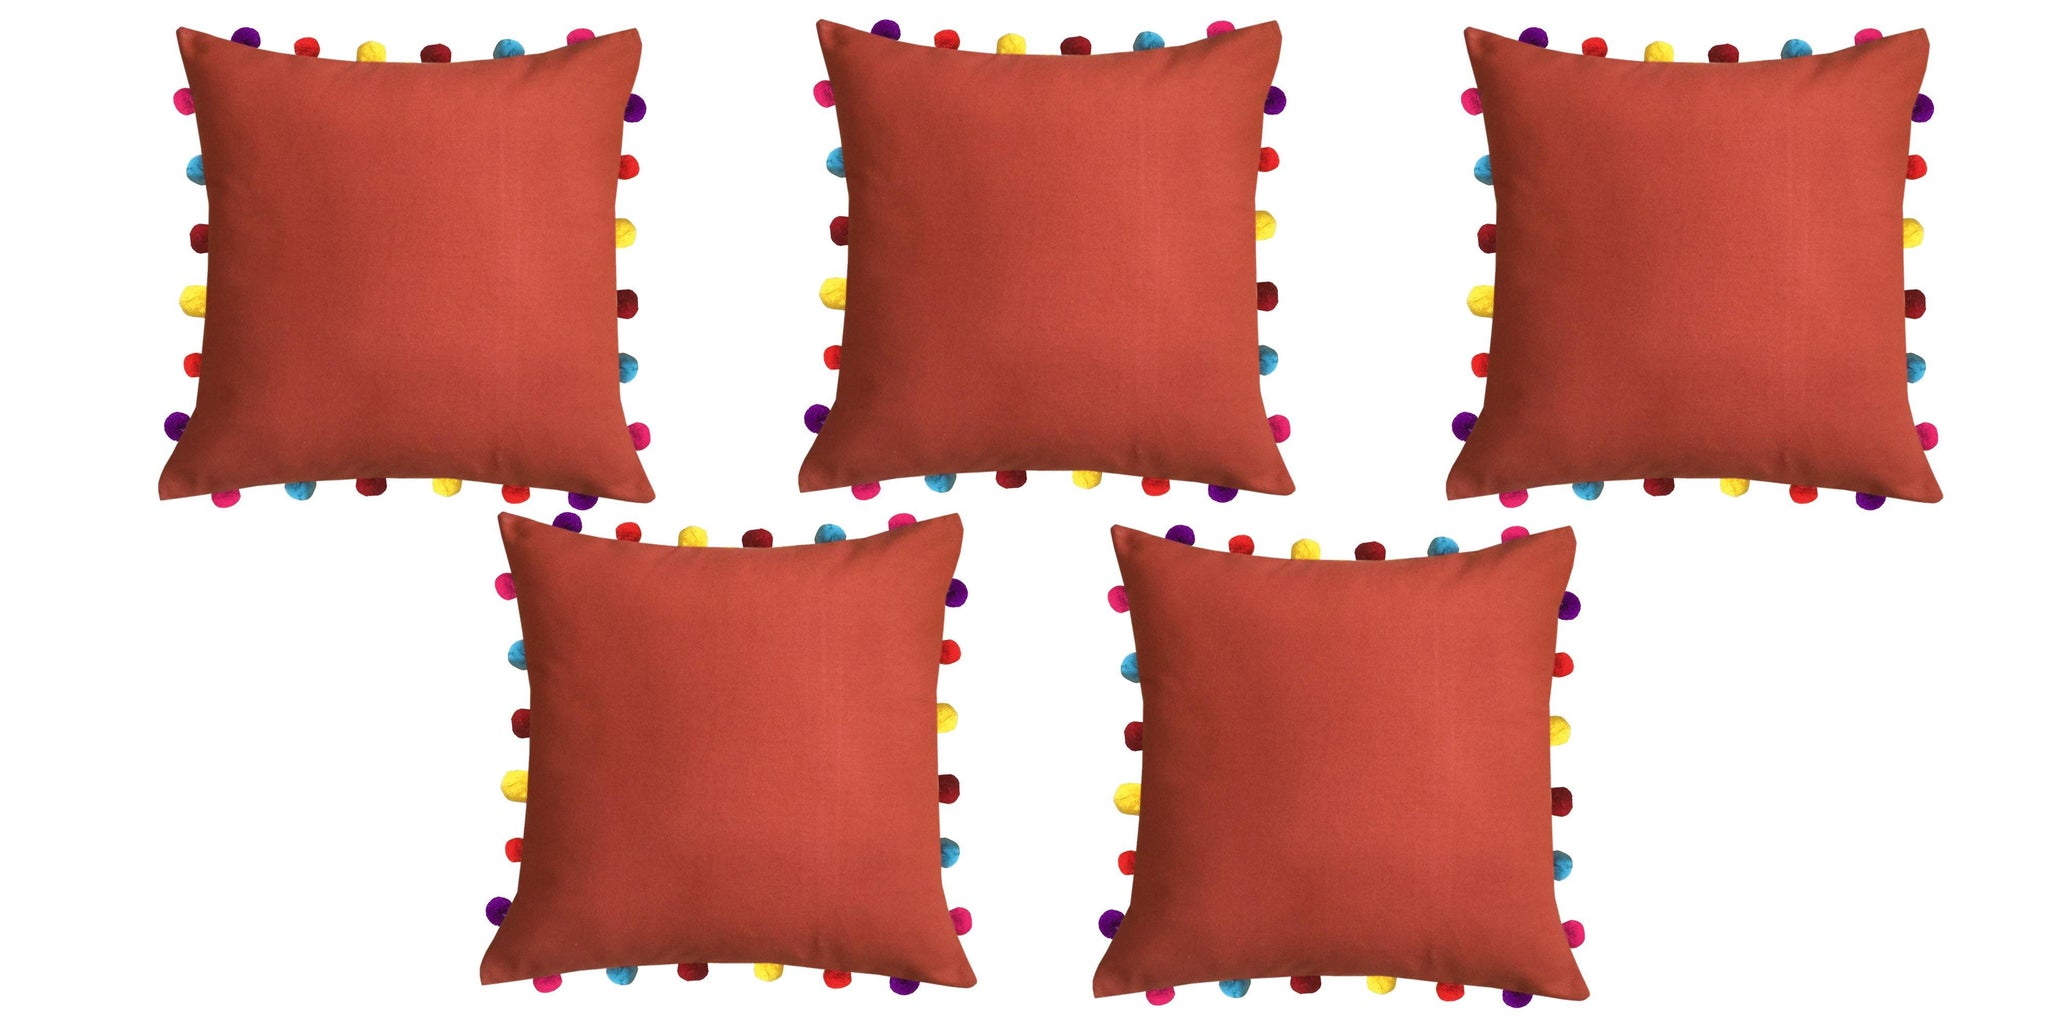 Lushomes Red Wood Cushion Cover with Colorful Pom pom (5 pcs, 18 x 18”) - Lushomes